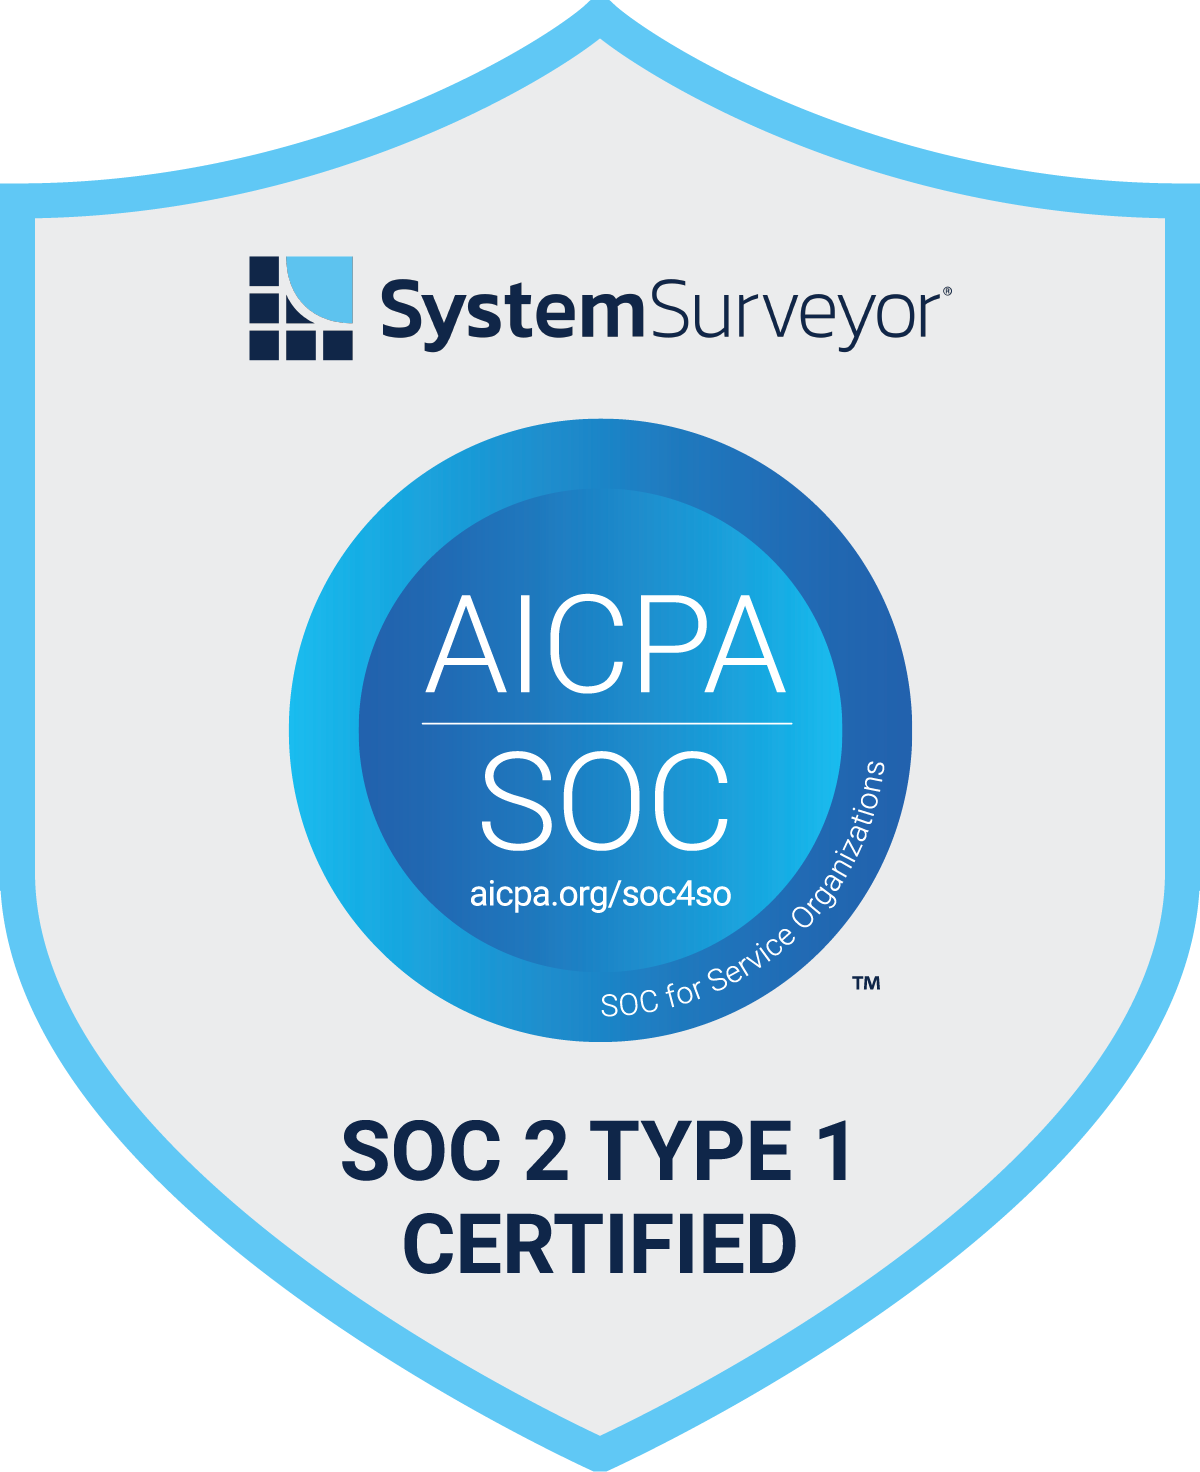 A graphic badge showing that System Surveyor is SOC 2 Type 1 Certified by AICPA.